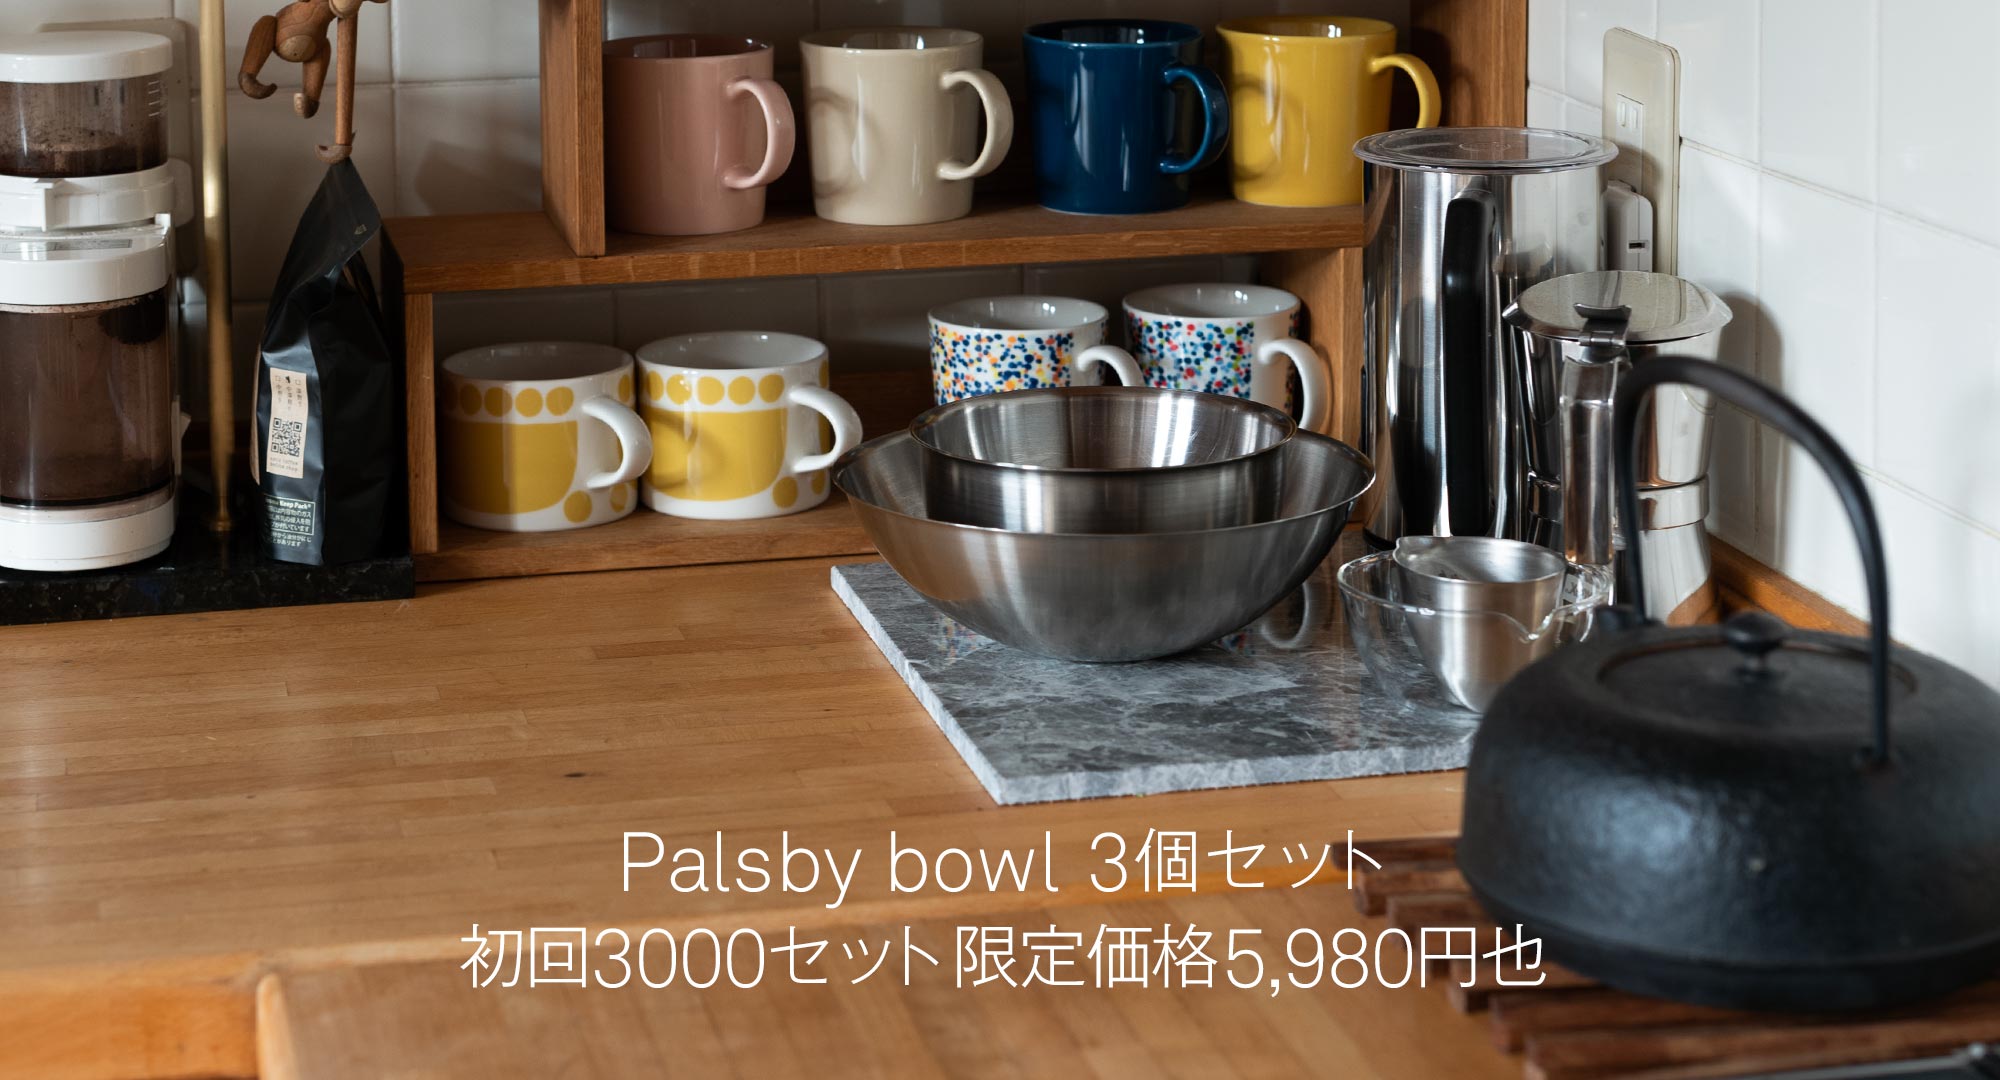 Palsby Bowl